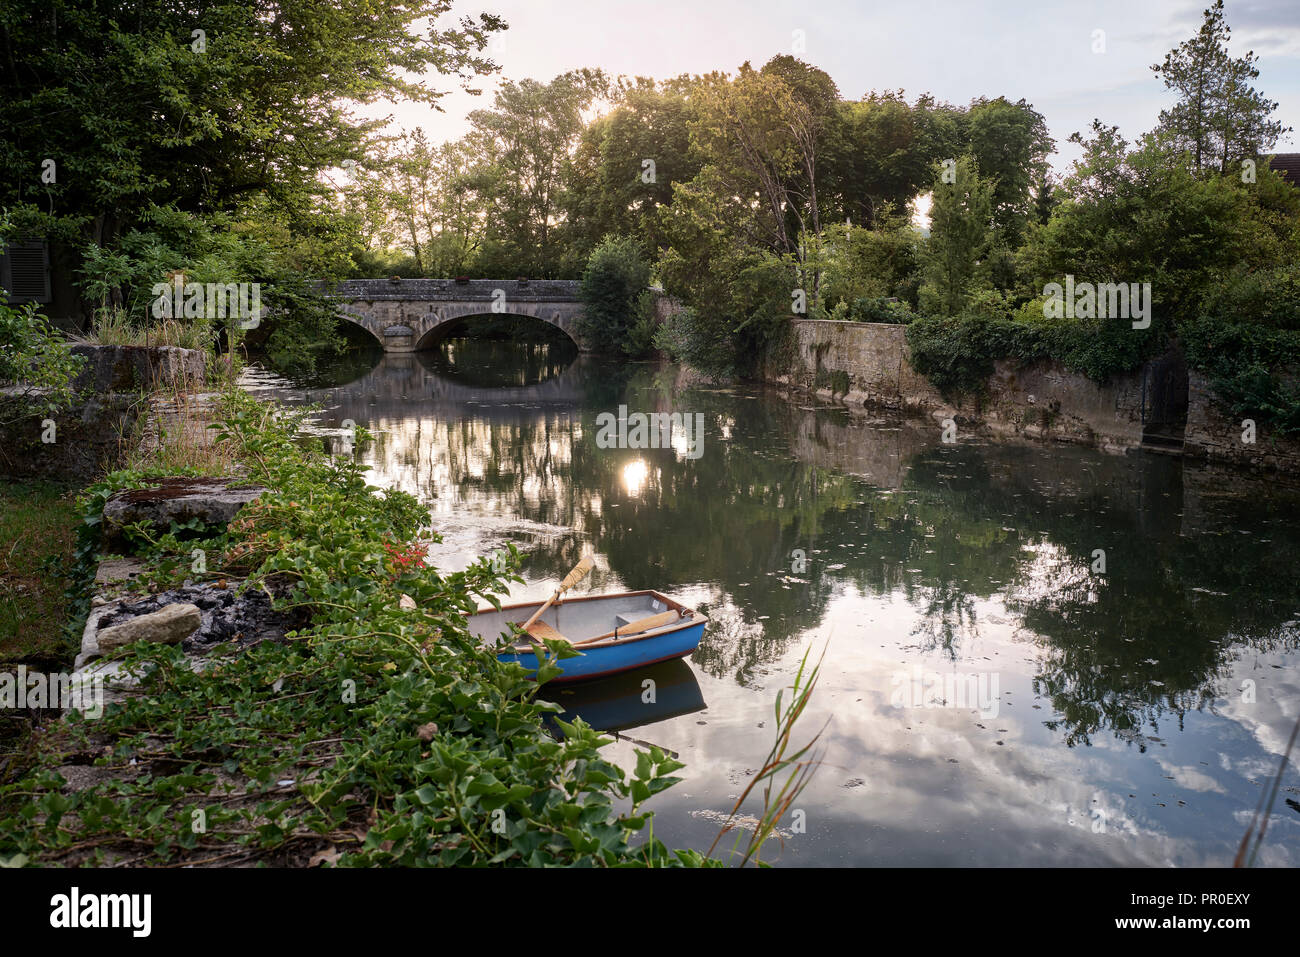 Rowing boat on river with arched stone bridge Stock Photo